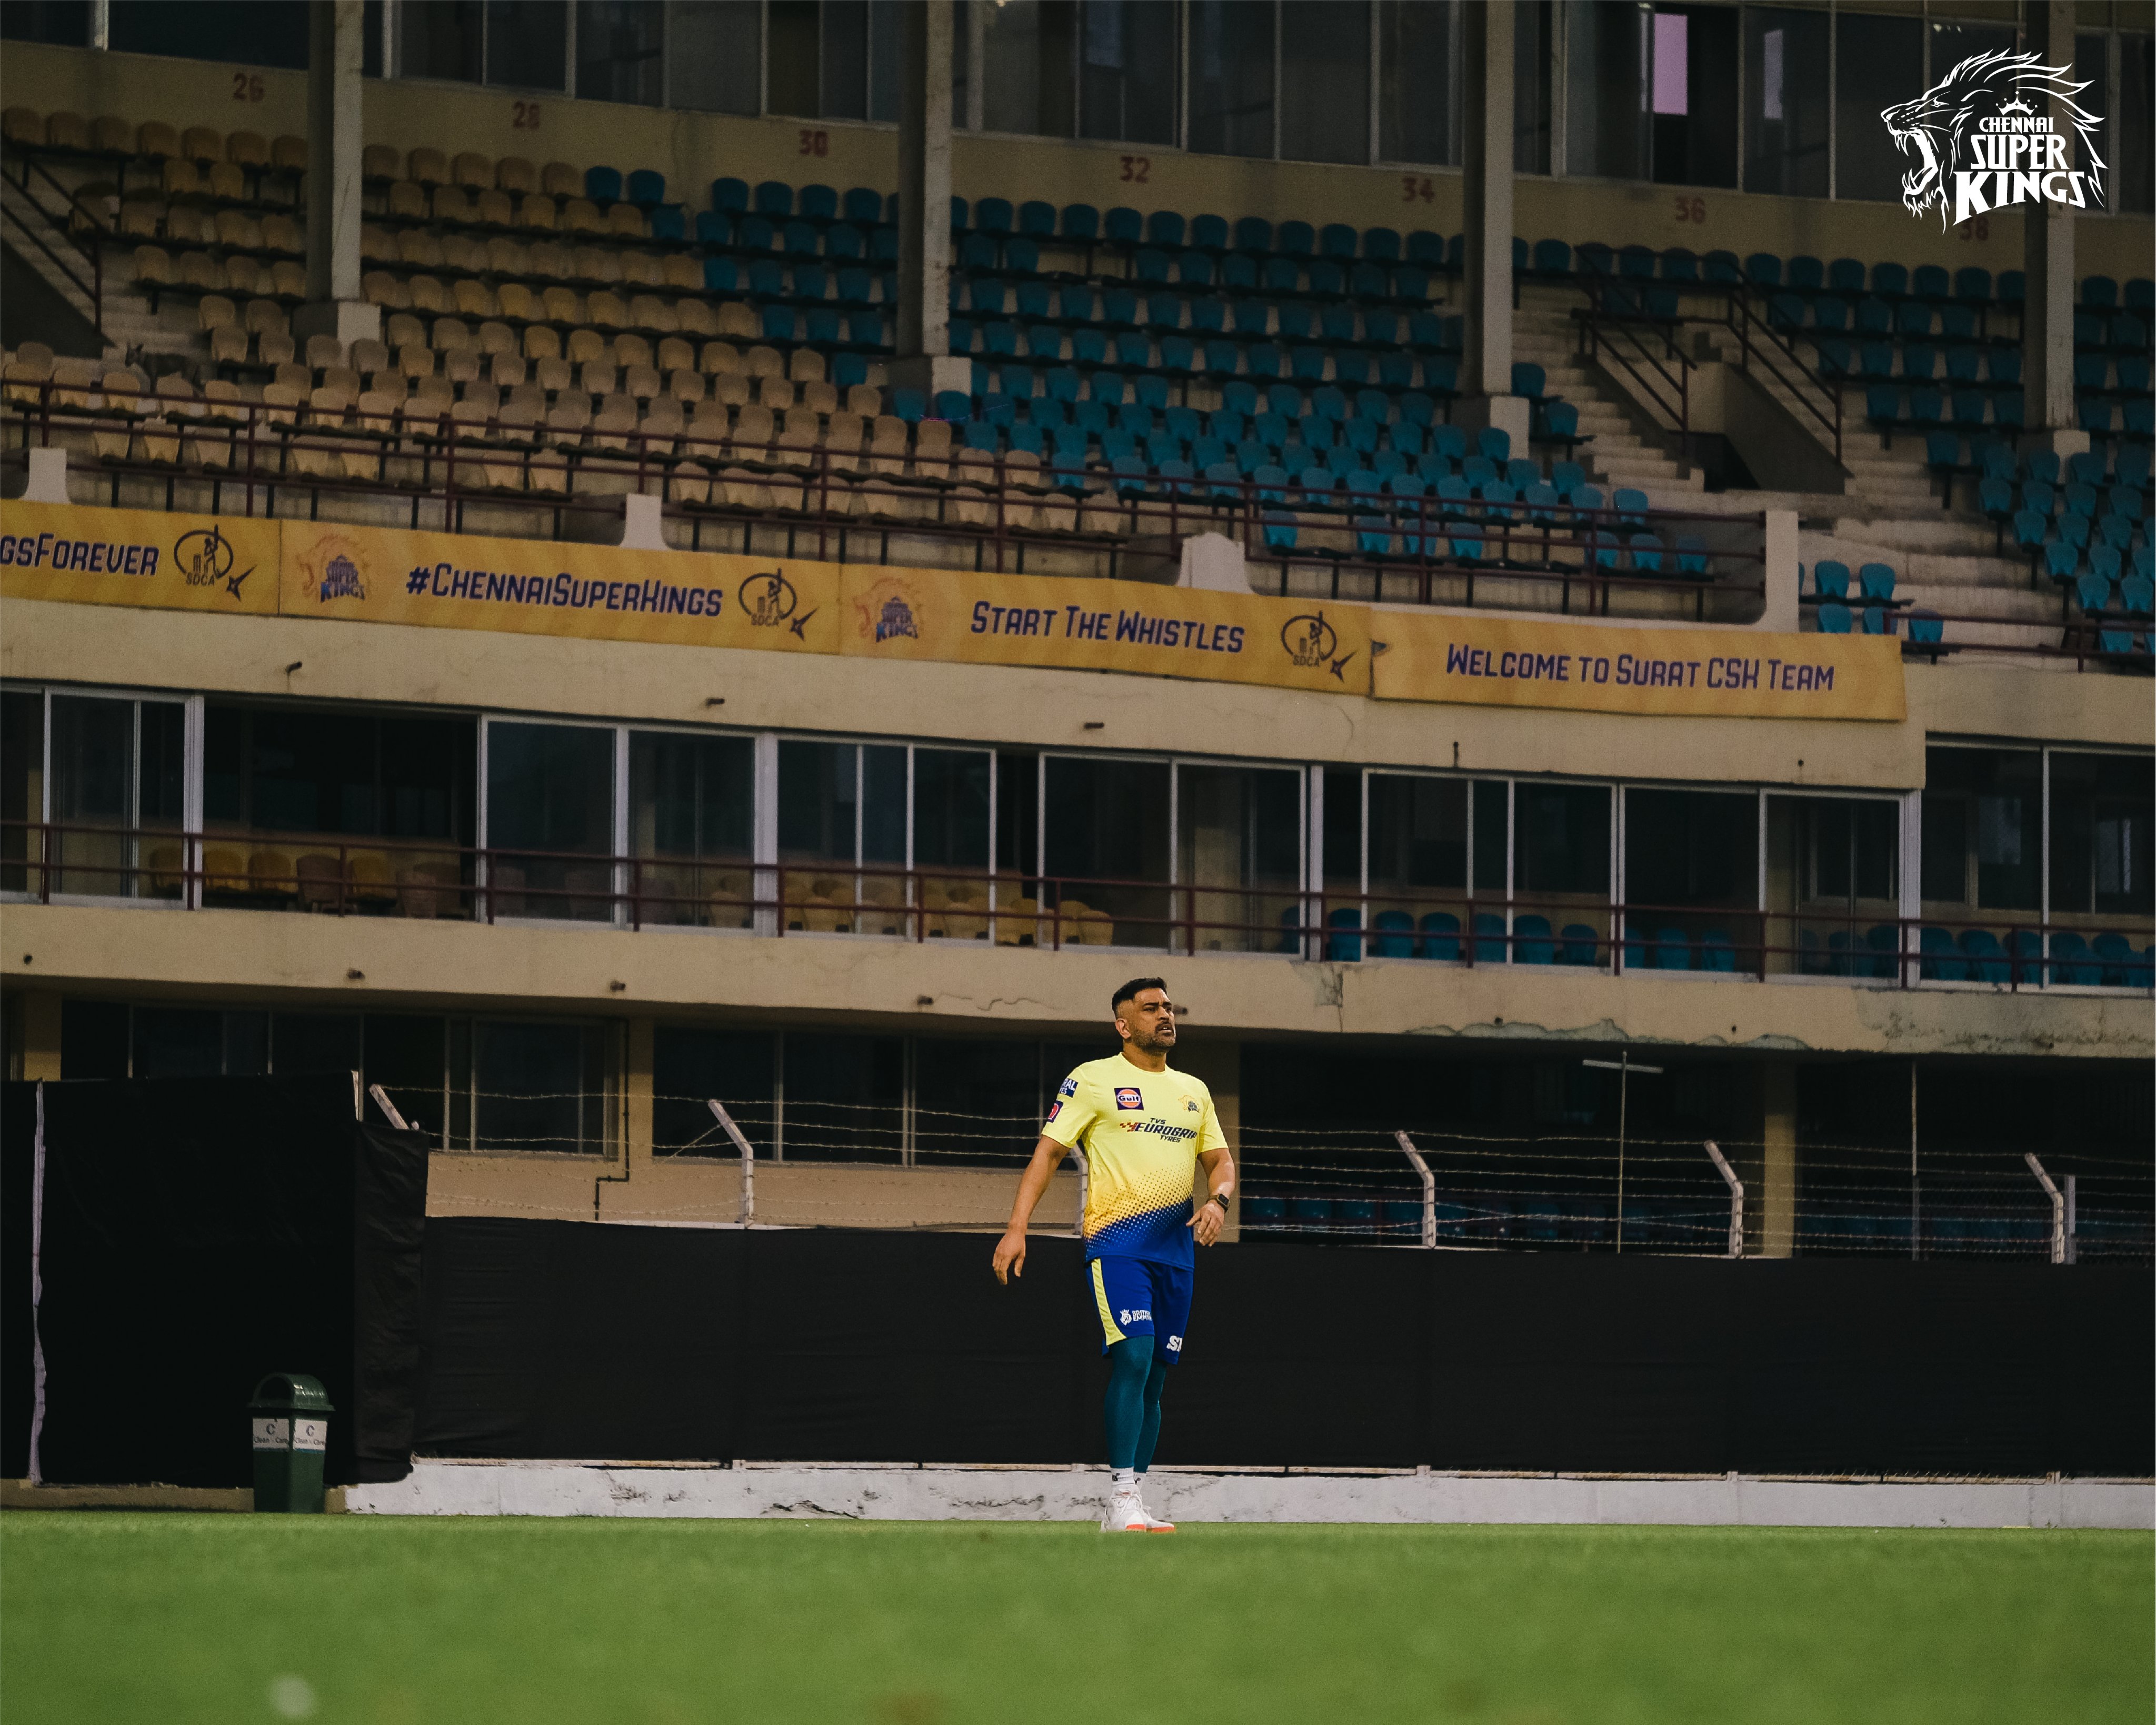 IPL 2022: Captain MS Dhoni sends BIG WARNING with MASSIVE sixes in Chennai Super Kings nets - Watch video